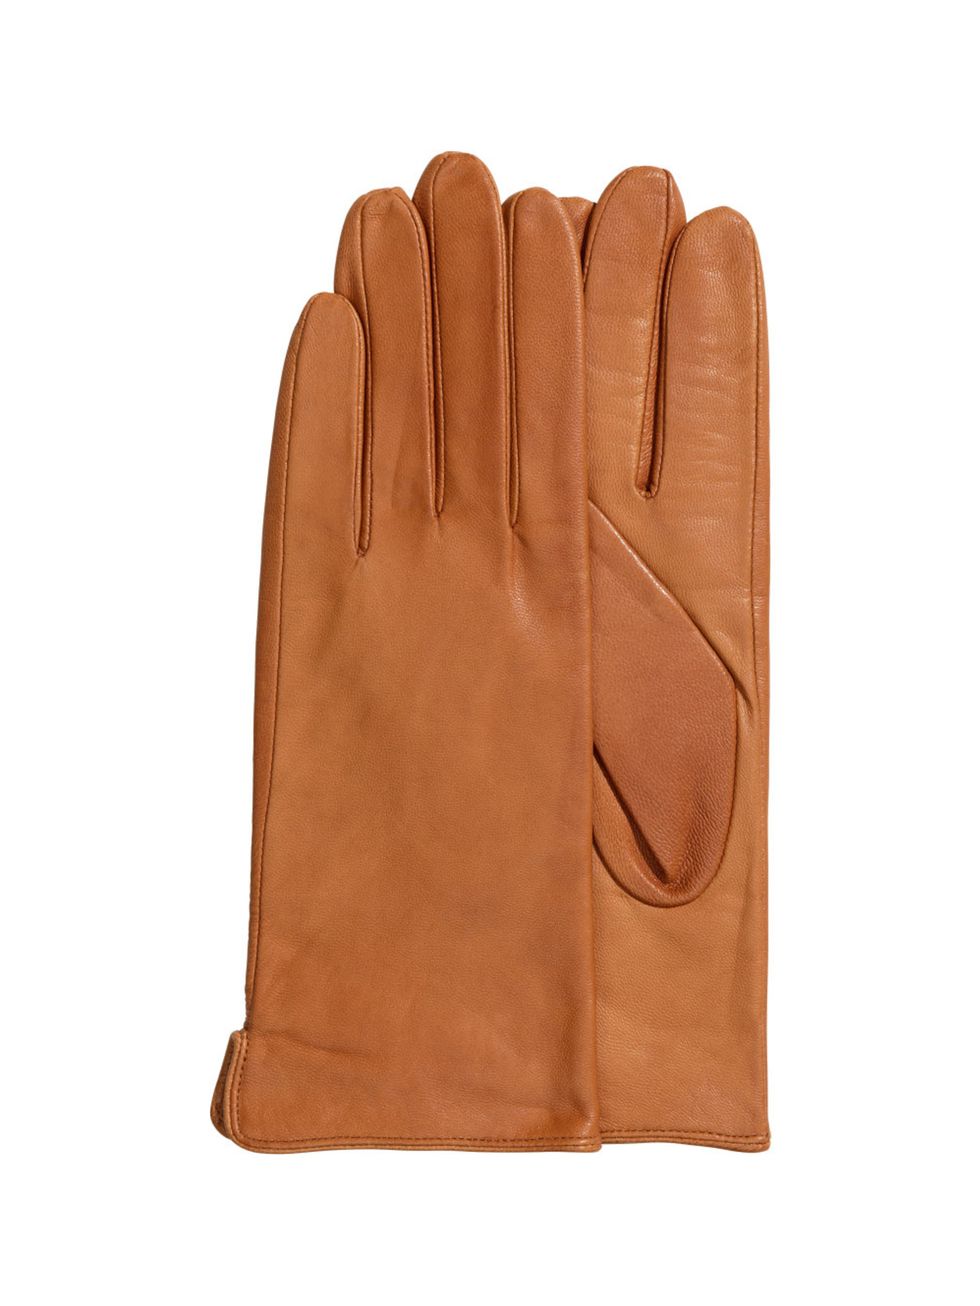 Finger, Brown, Skin, Safety glove, Personal protective equipment, Tan, Khaki, Beige, Thumb, Sports gear, 